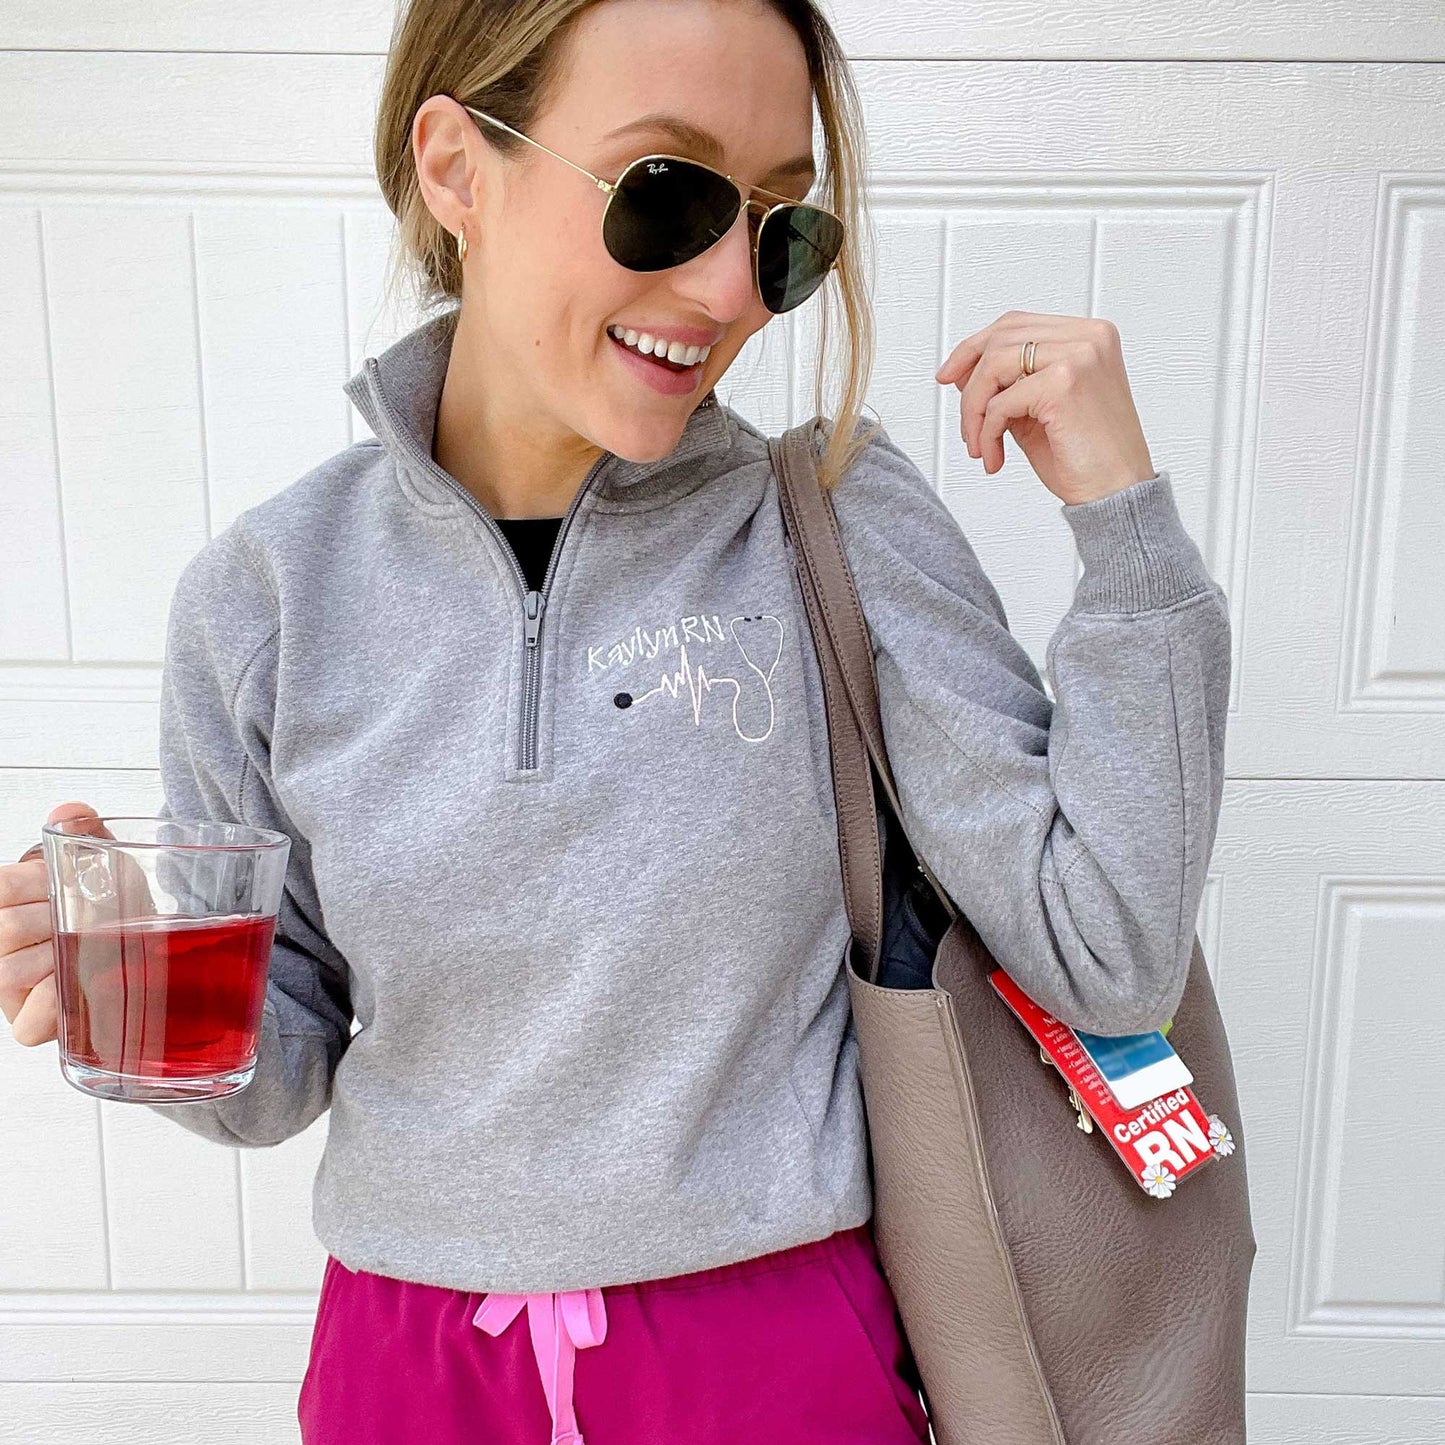 Nurse wearing pink scrub pants and a ladies fit vintage heather gray collared quarter zip with a custom name, credentials, and heartbeat stethoscope design embroidered on the left chest